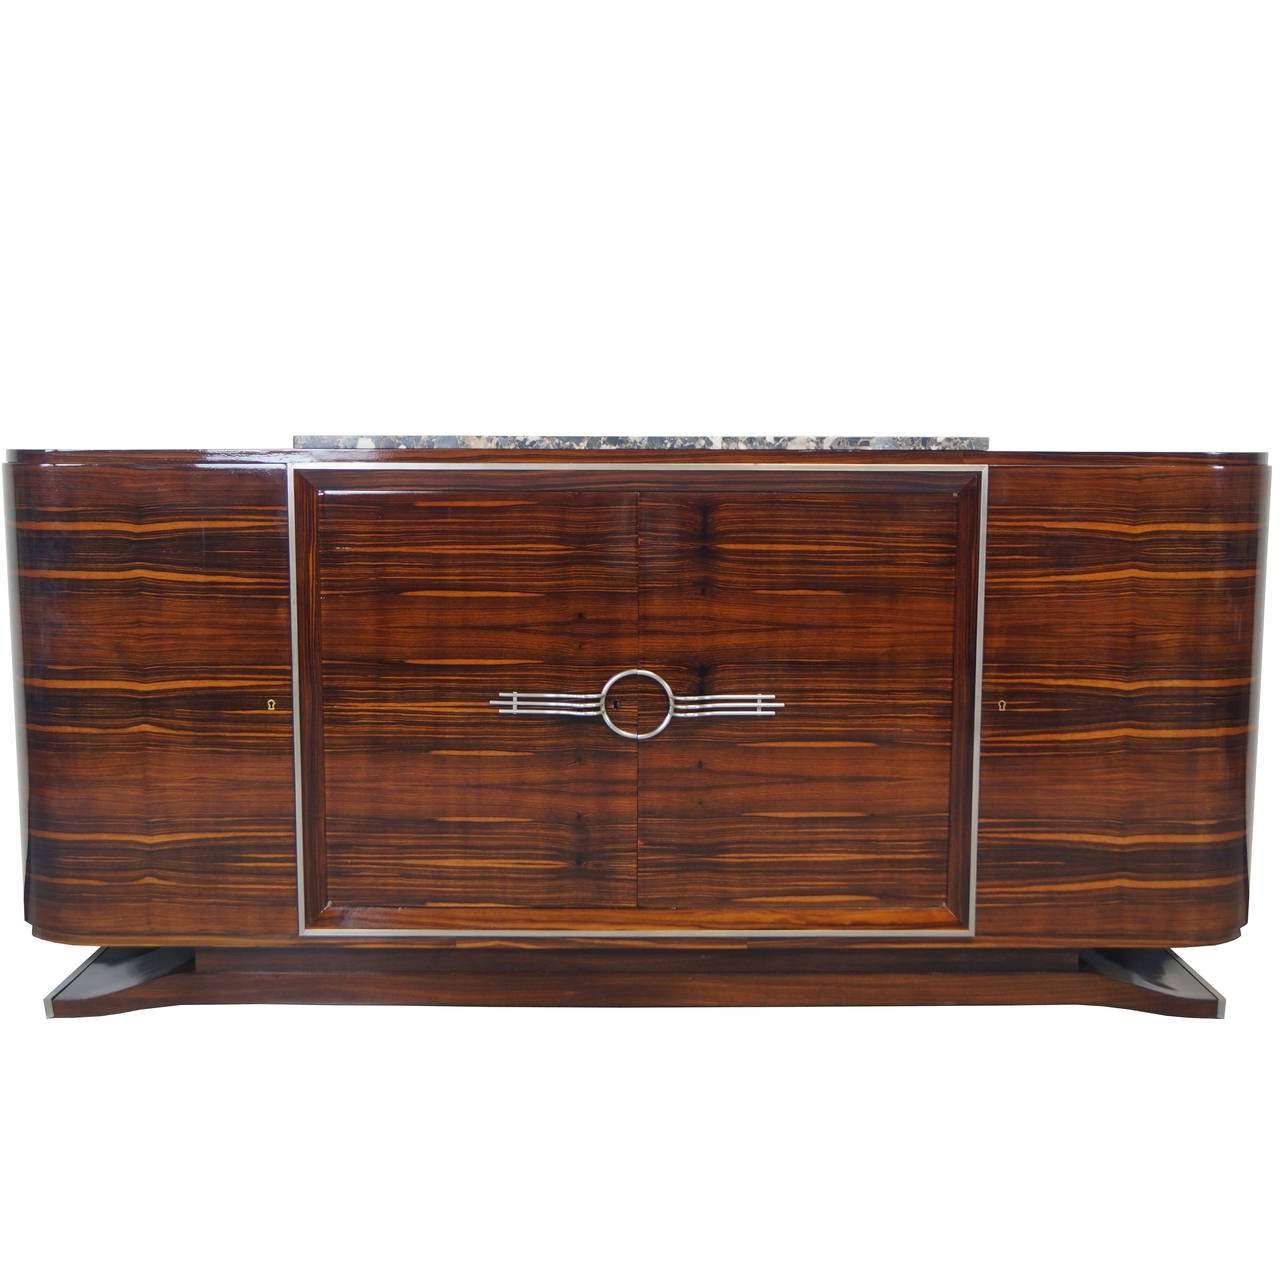 French Art Deco Sideboard At 1stdibs With Regard To Art Deco Sideboards (View 1 of 20)